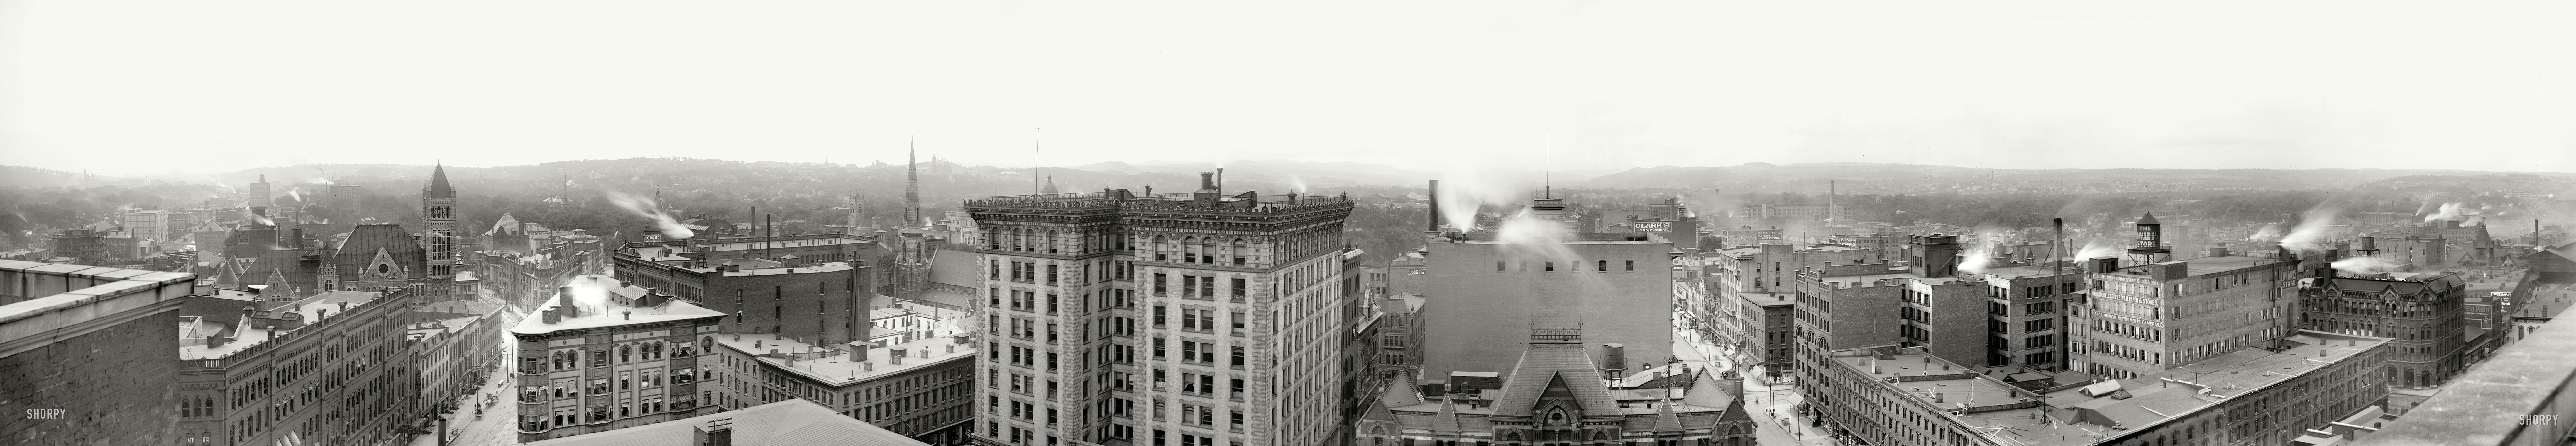 Circa 1901. "General view of Syracuse, N.Y." At center is the University Building on Washington Street. Panorama of five 8x10 inch glass plates. View full size.